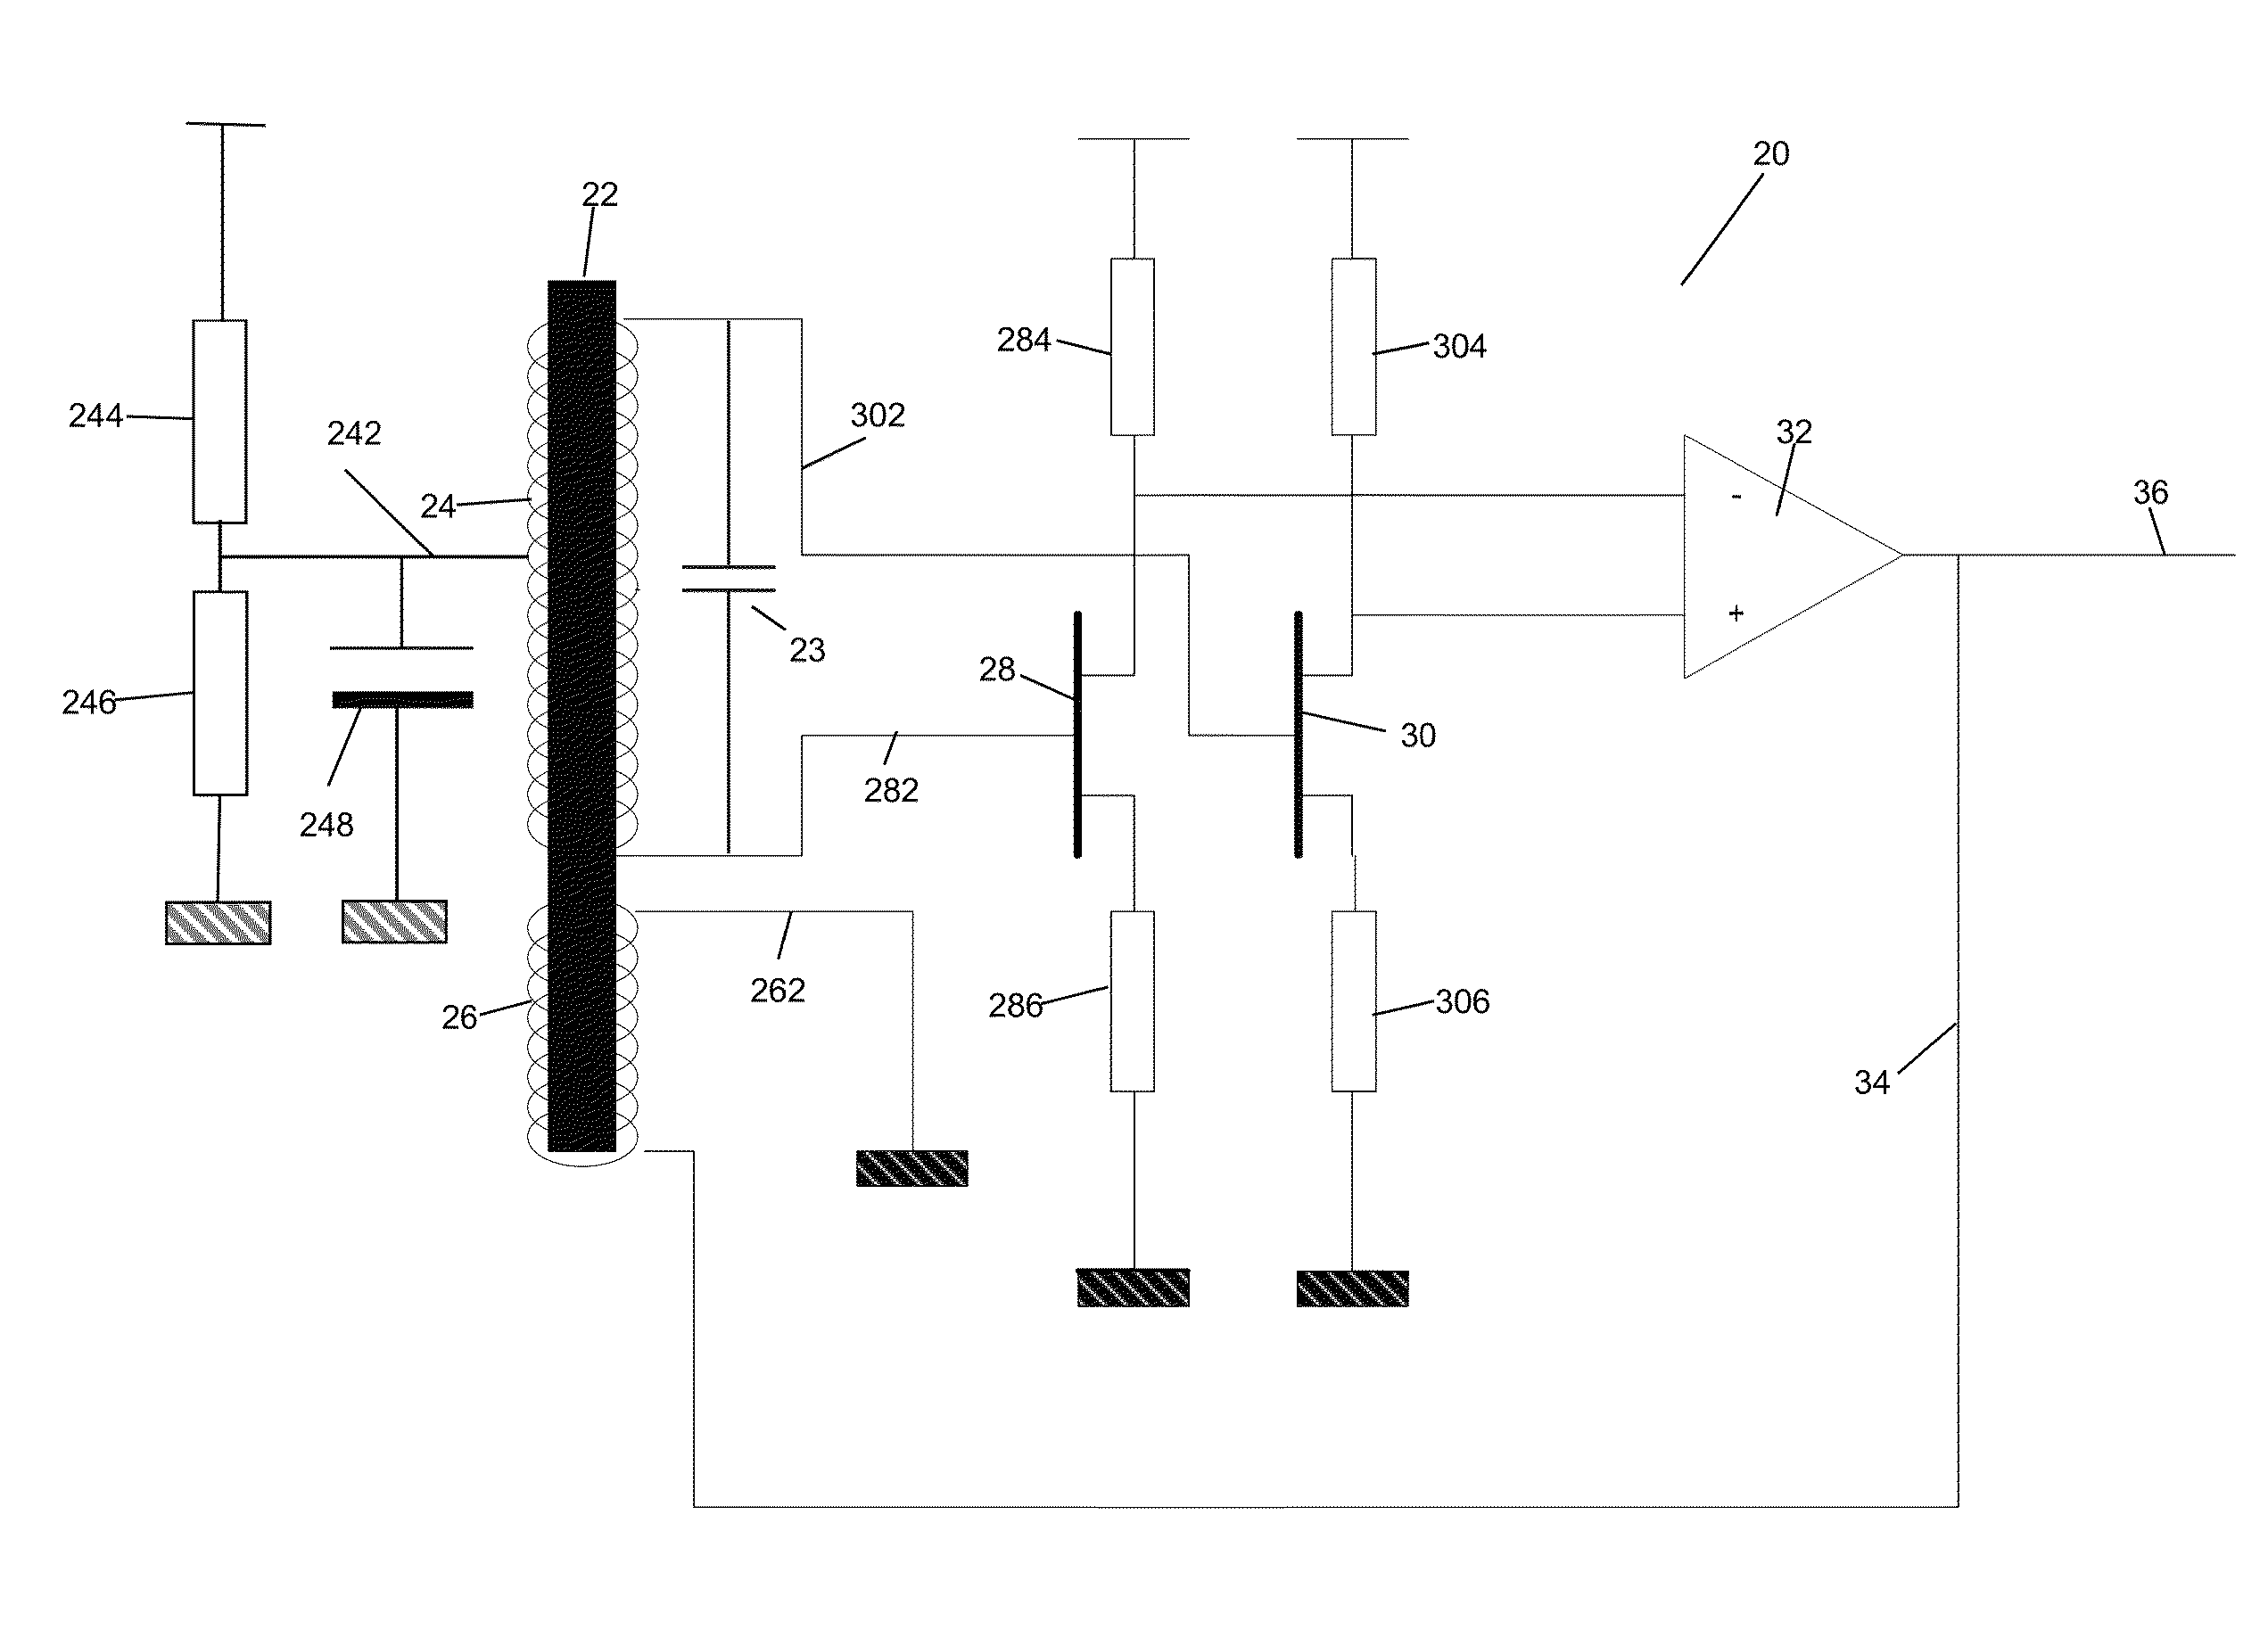 Reduced Q low frequency antenna